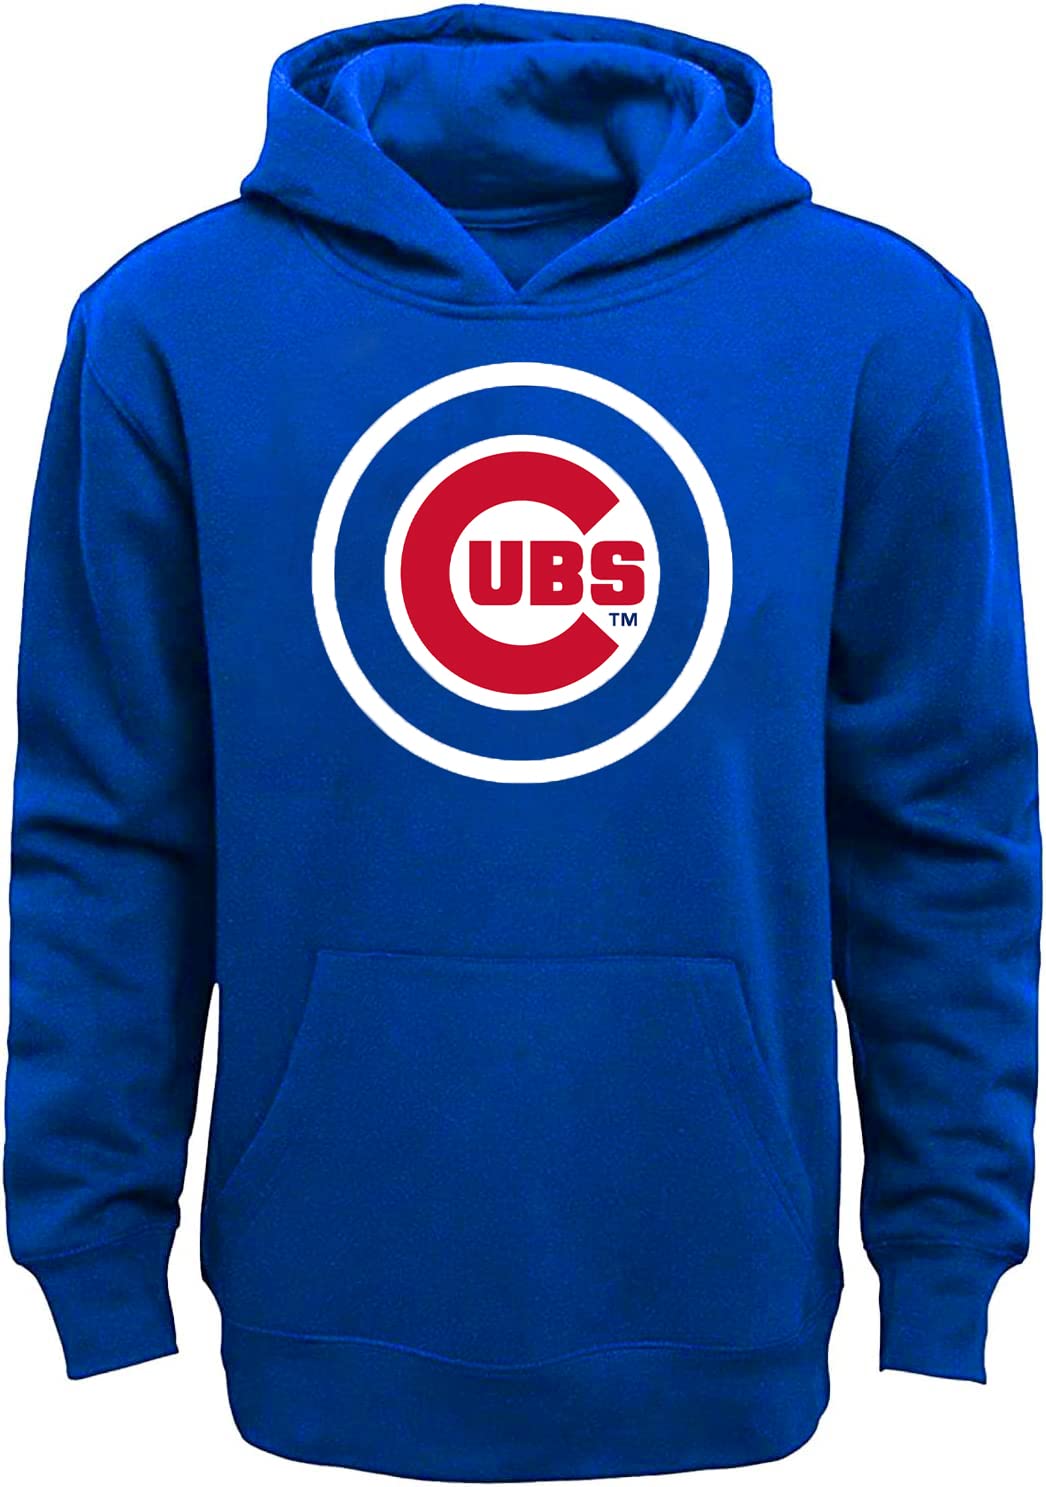 Outerstuff MLB Youth 8-20 Team color Primary Logo Fleece Sweatshirt Hoodie - chicago cubs Blue (10-12)